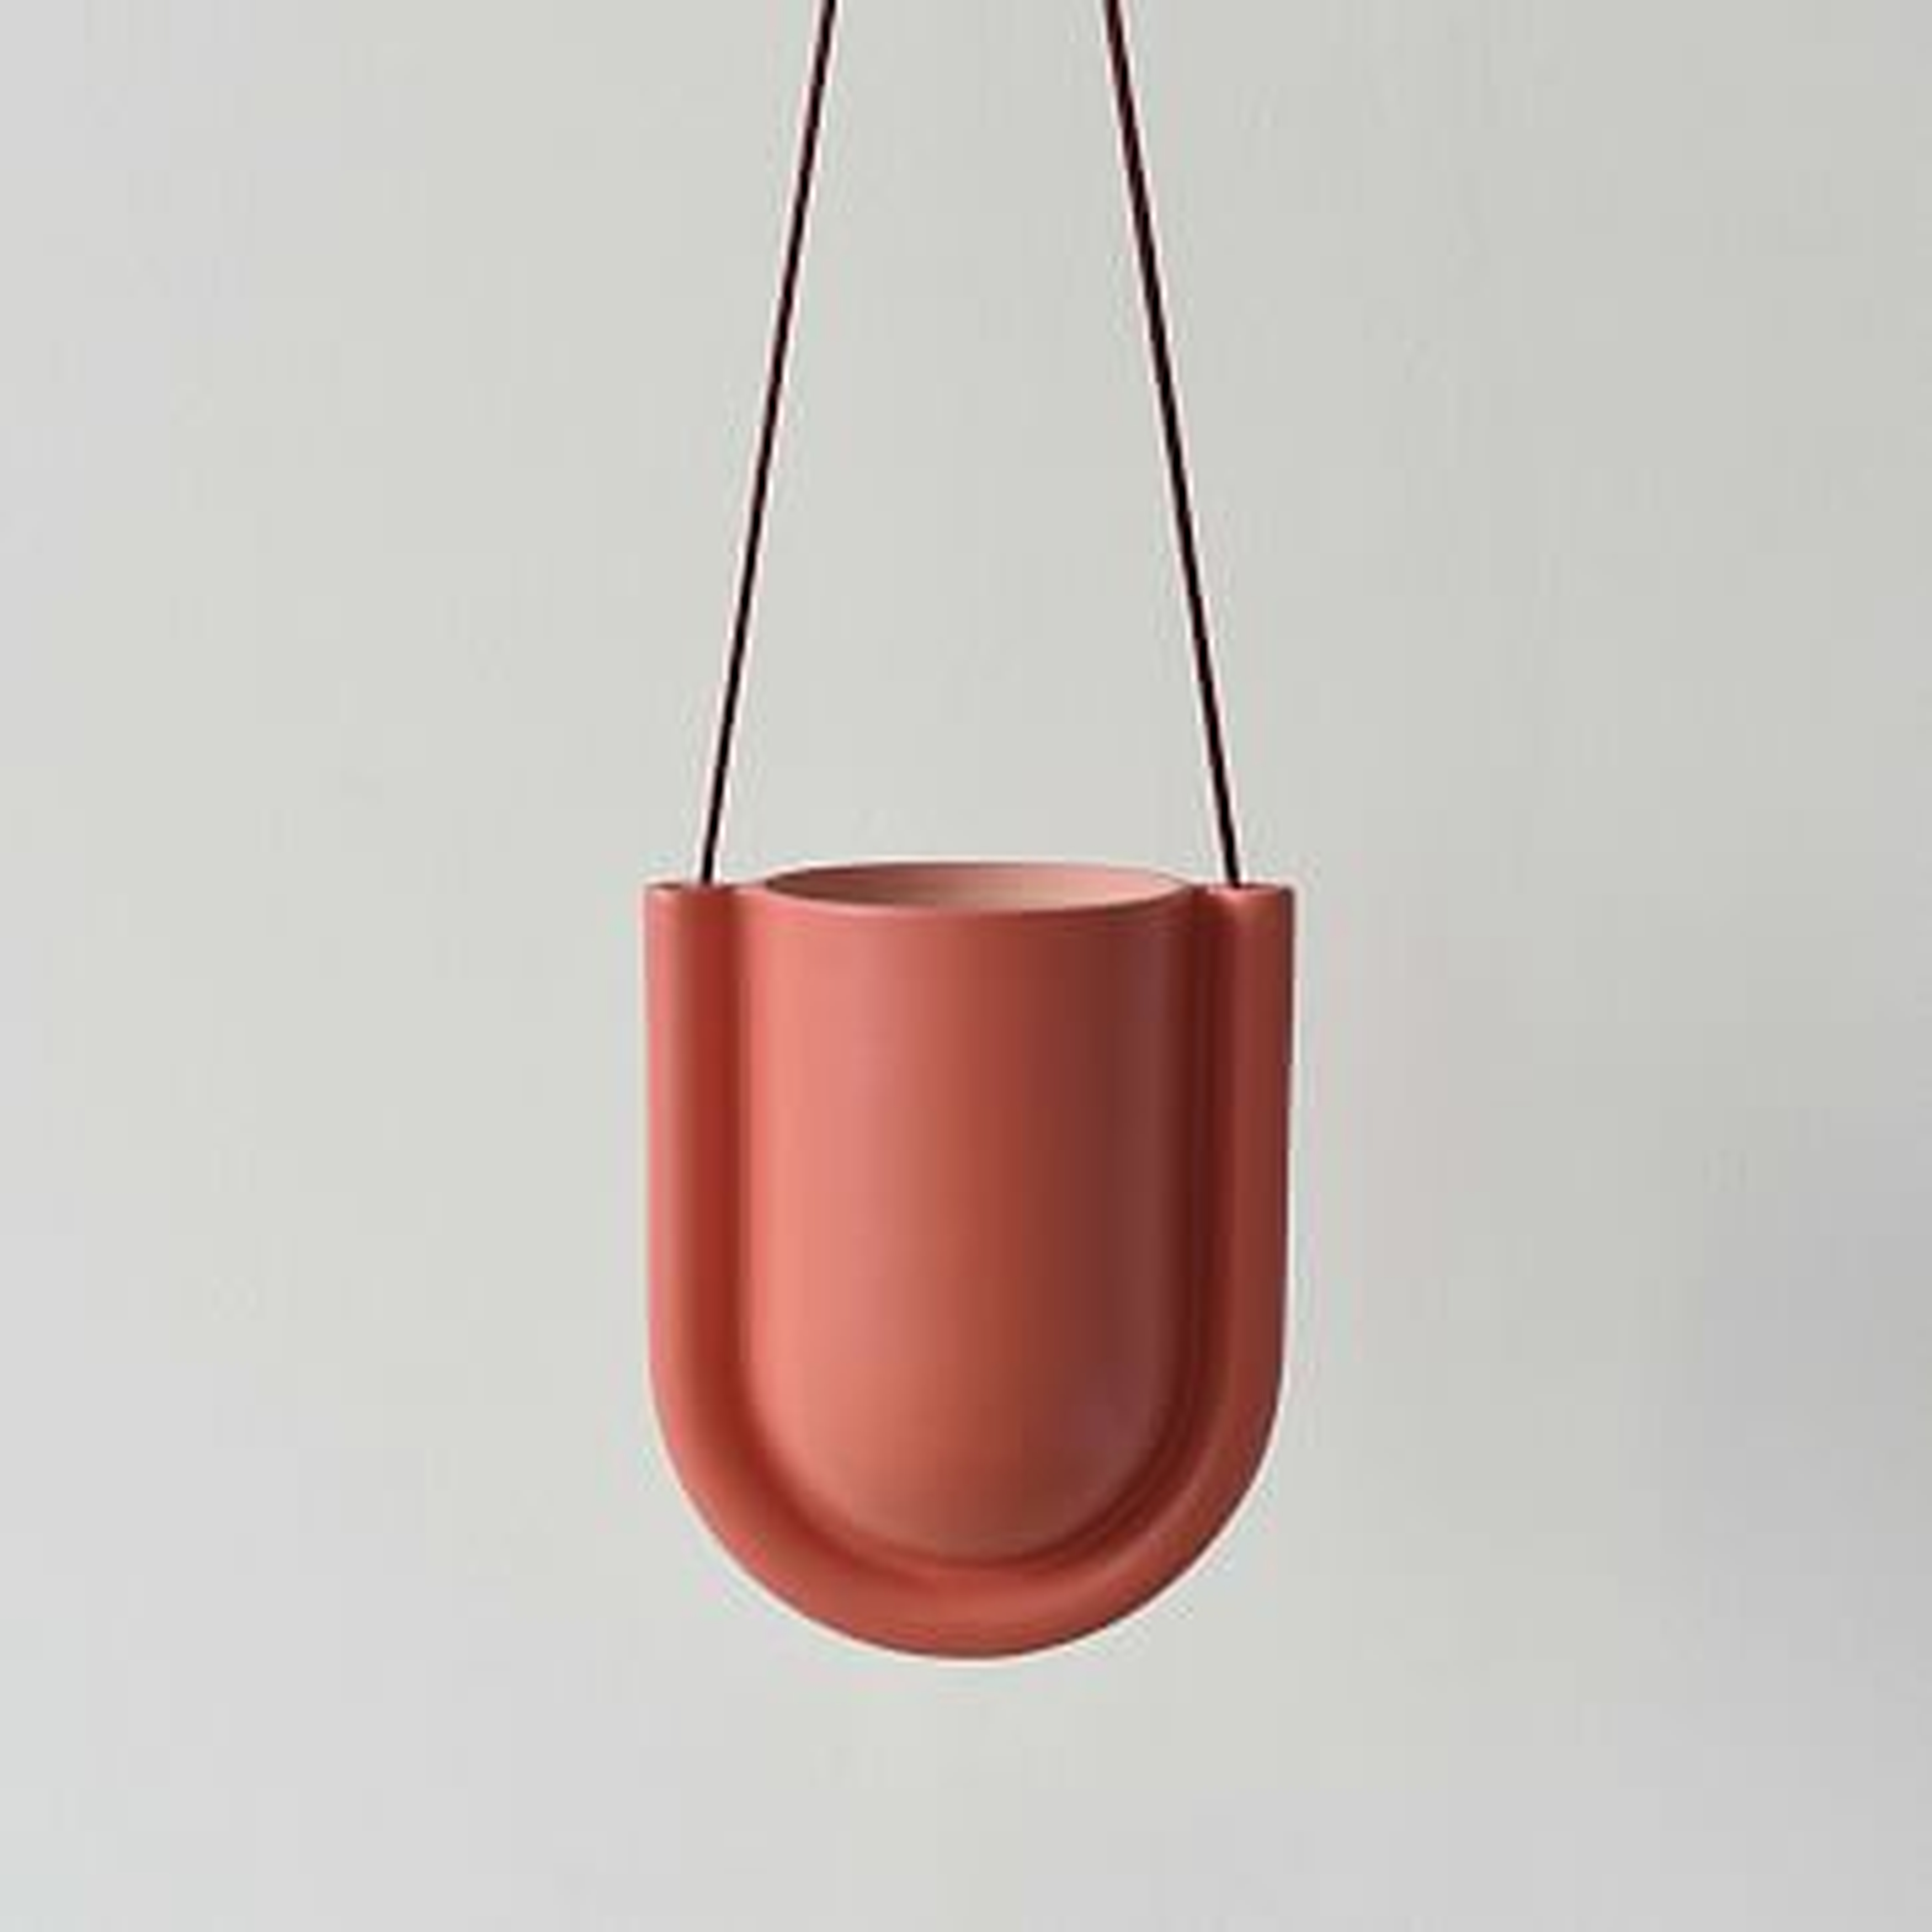 Misewell Portico Hanging Planter, Blush - West Elm